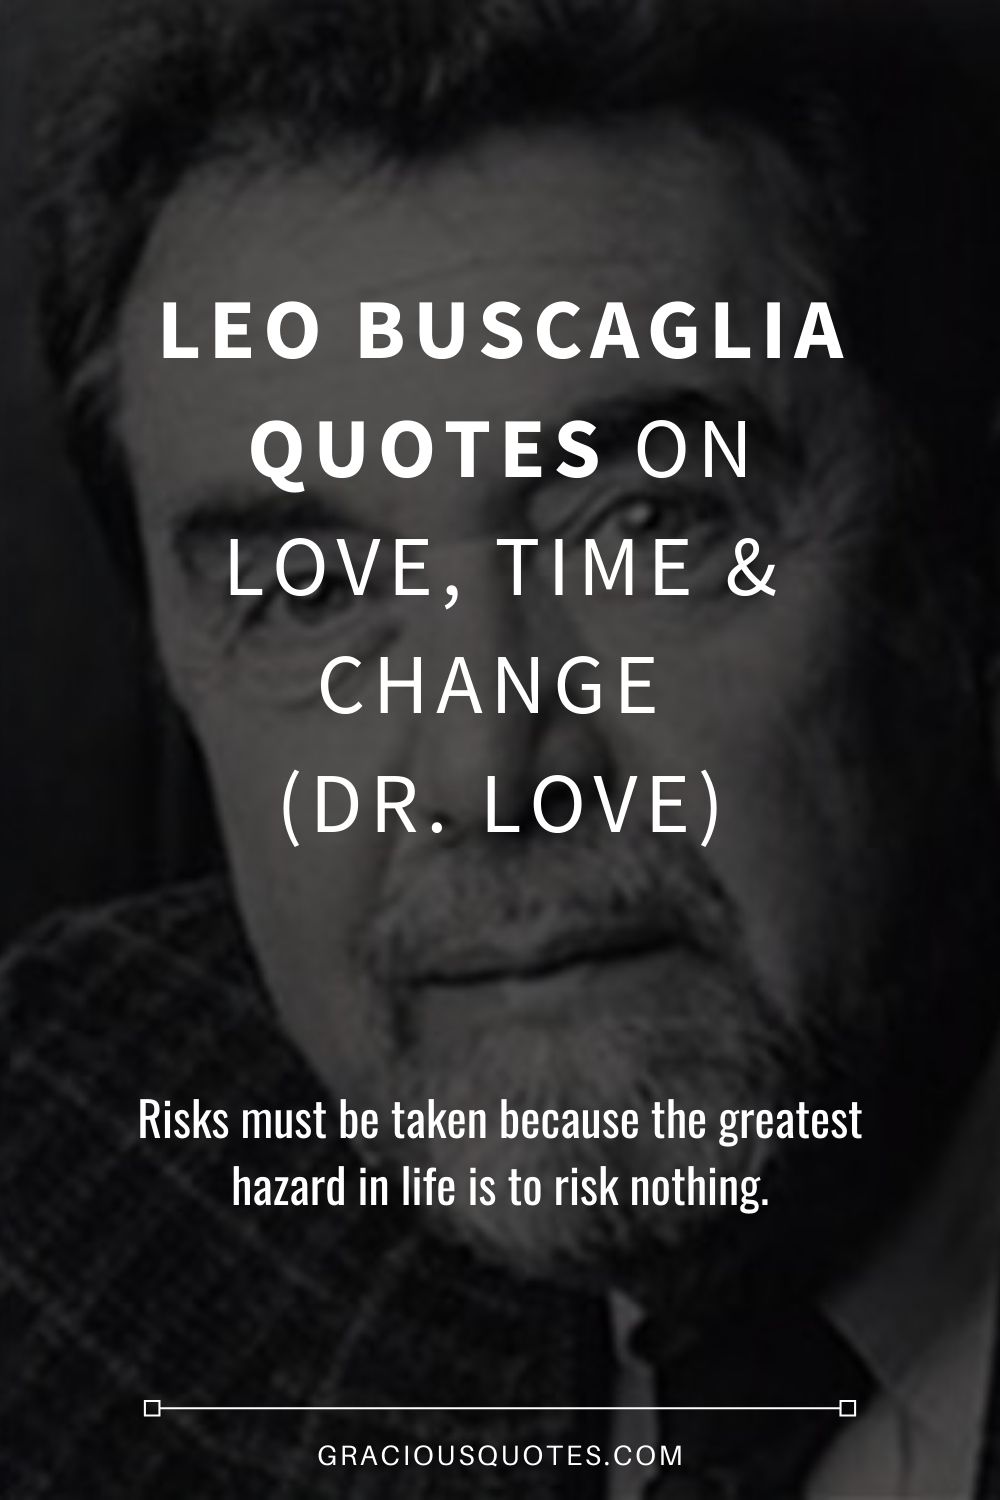 Leo-Buscaglia-Quotes-on-Love-Time-Change-DR.-LOVE-Gracious-Quotes